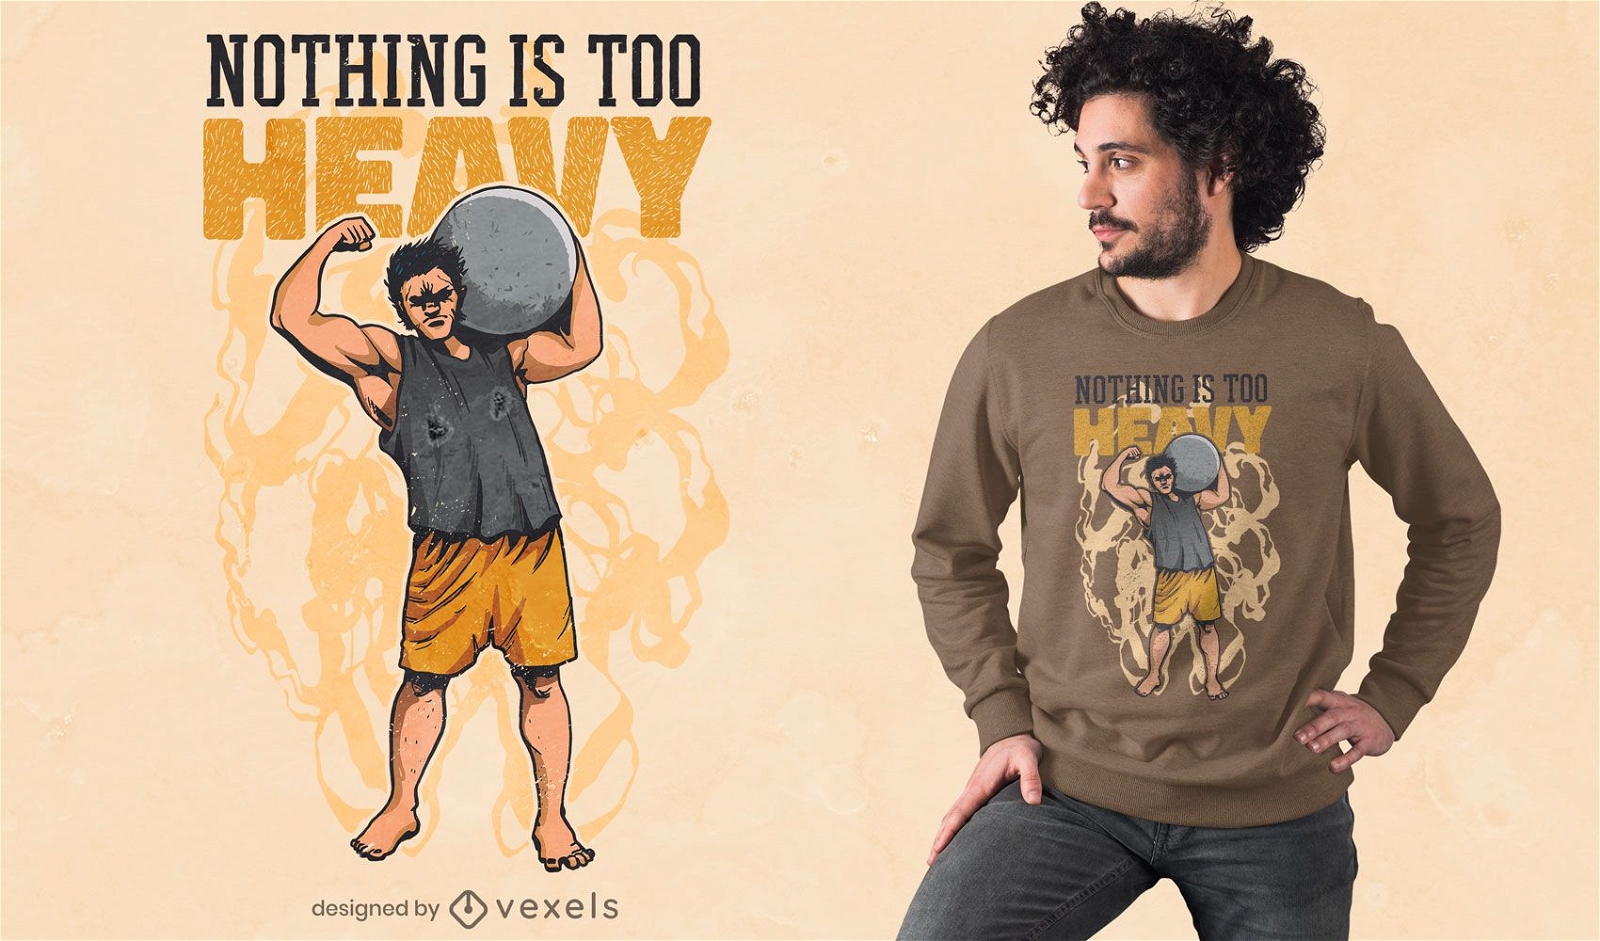 Weightlifting strongman quote t-shirt design